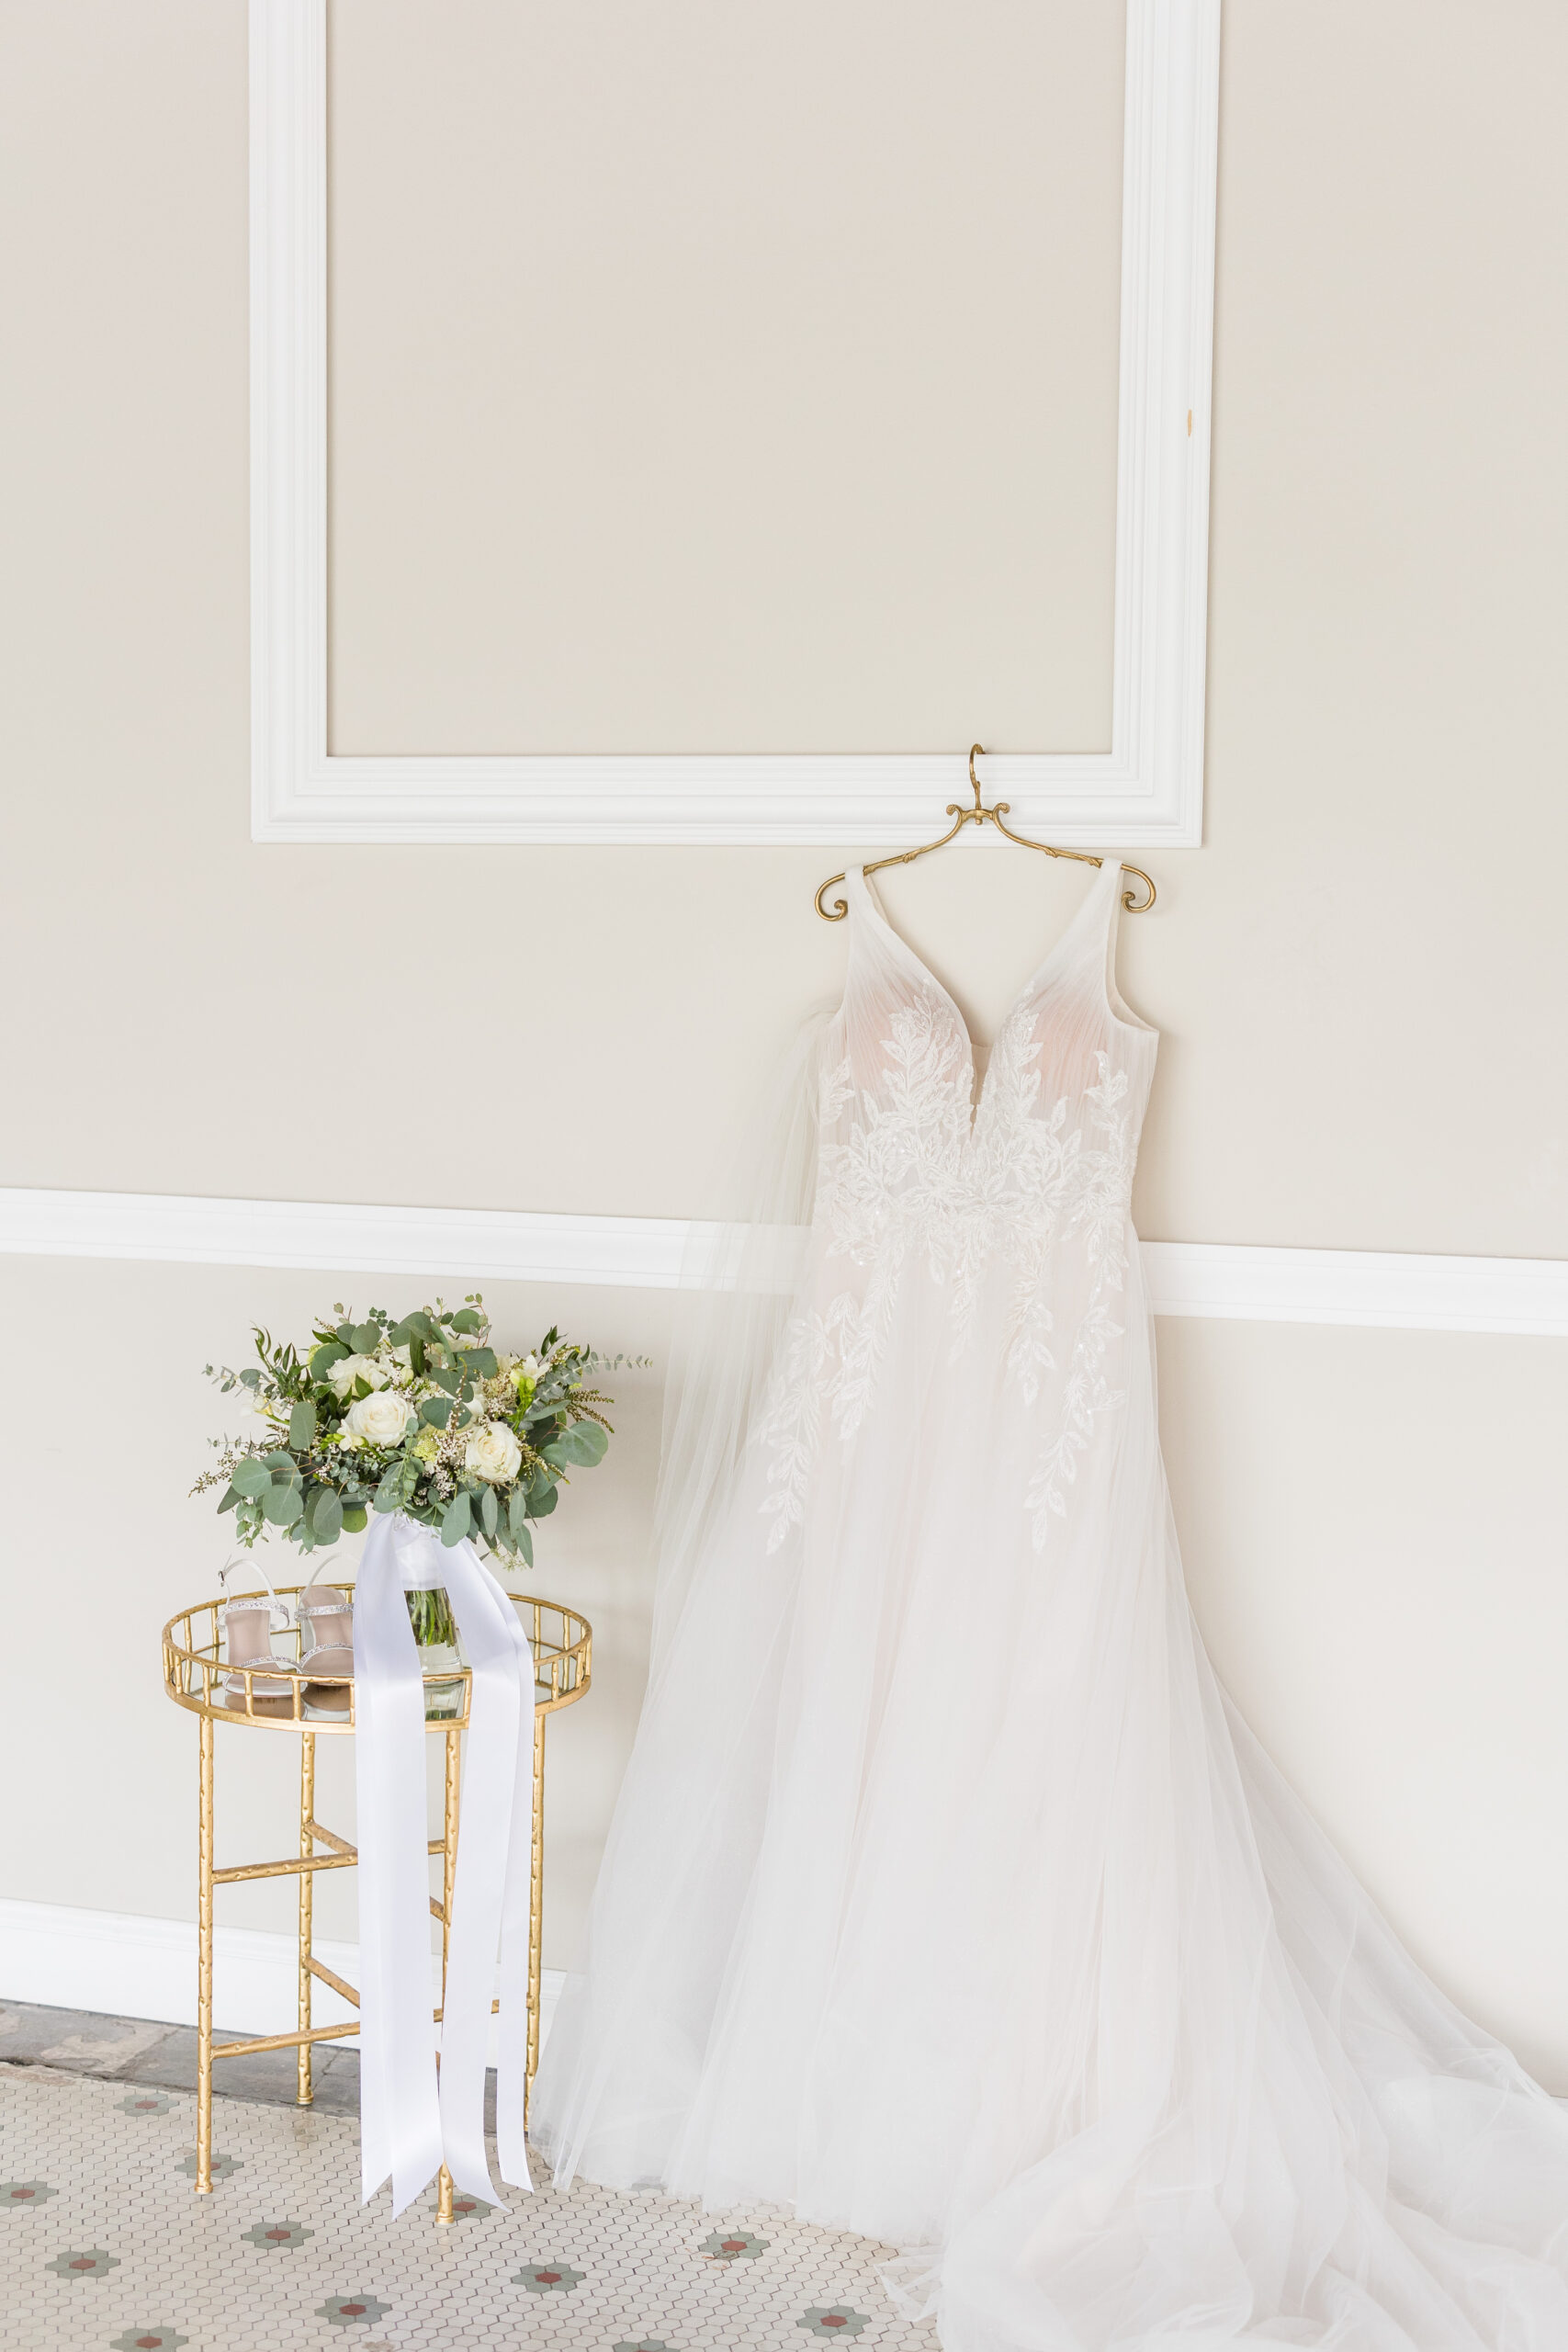 How to choose your wedding dress